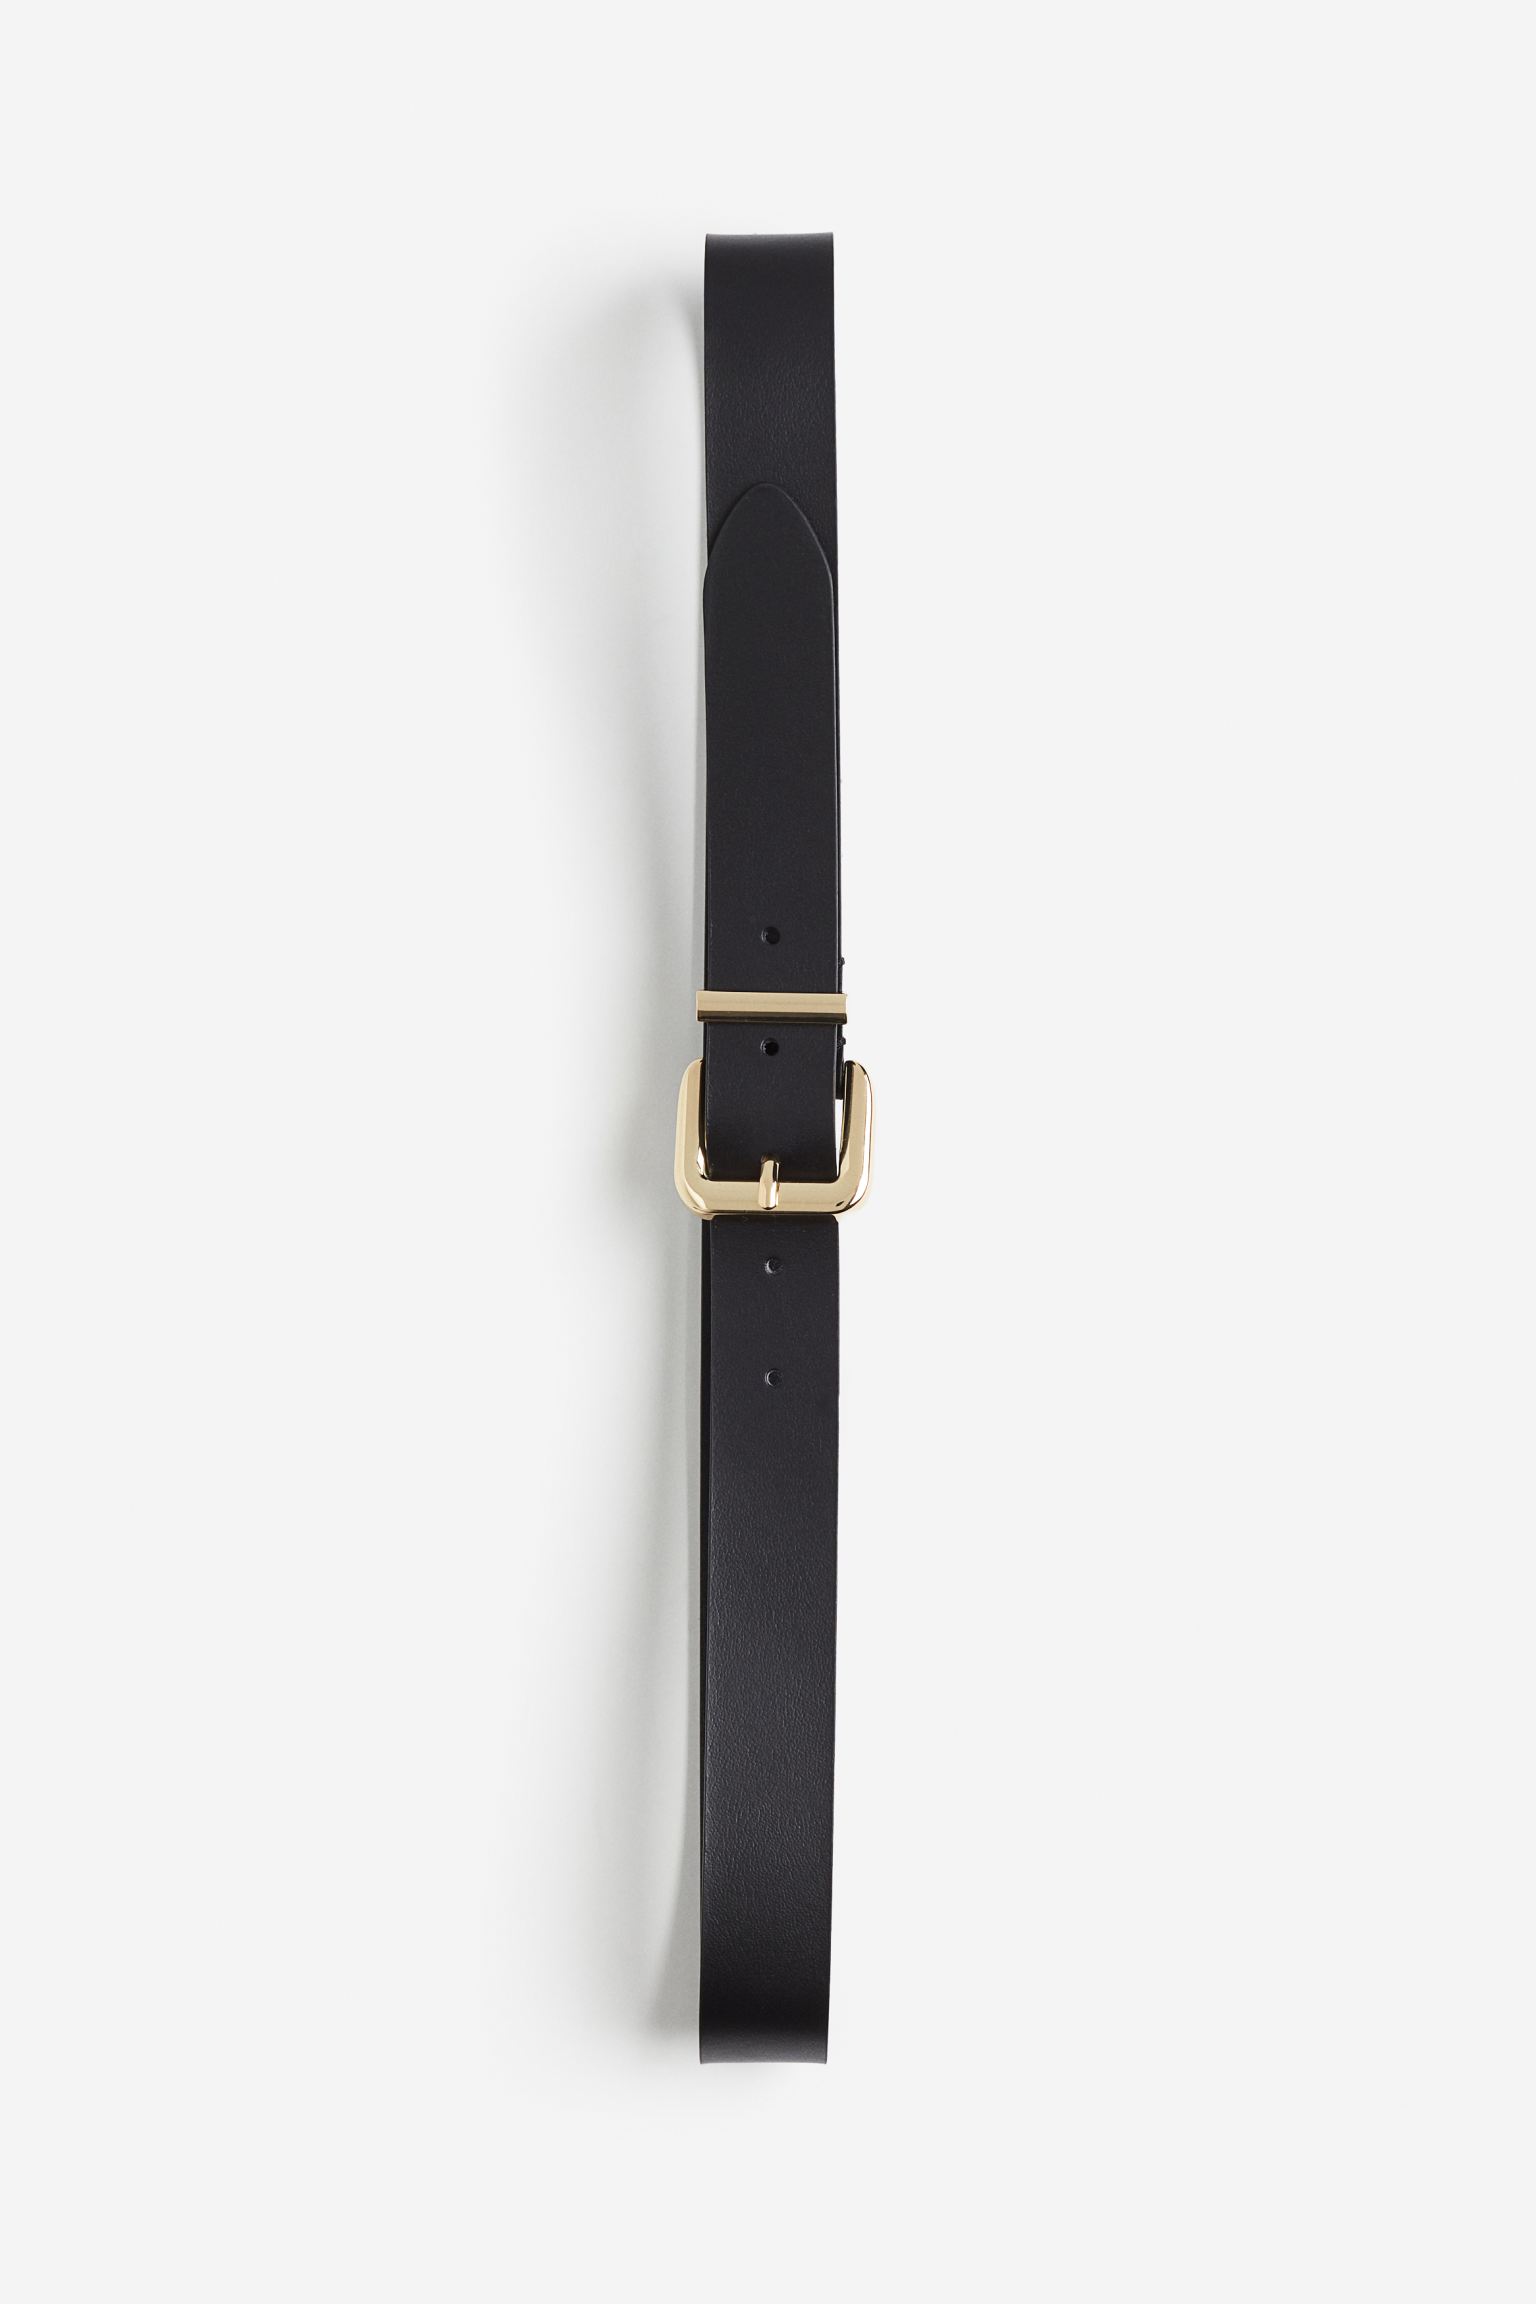 The Best Leather Belts You Could Ever Invest In | Who What Wear UK